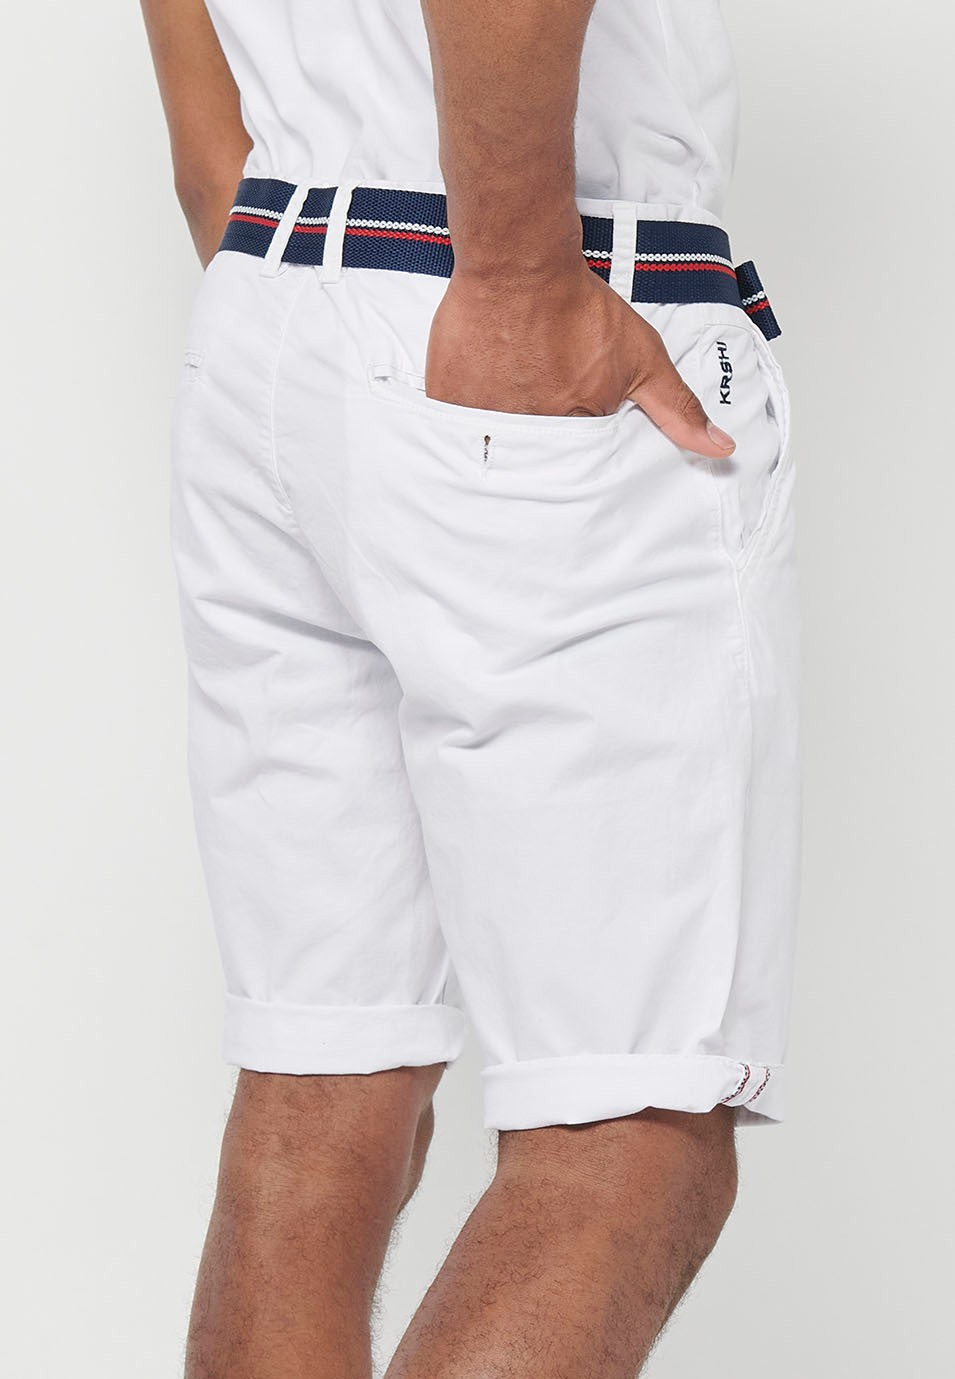 Shorts with a turn-up finish with front closure with zipper and button and belt in White for Men 7